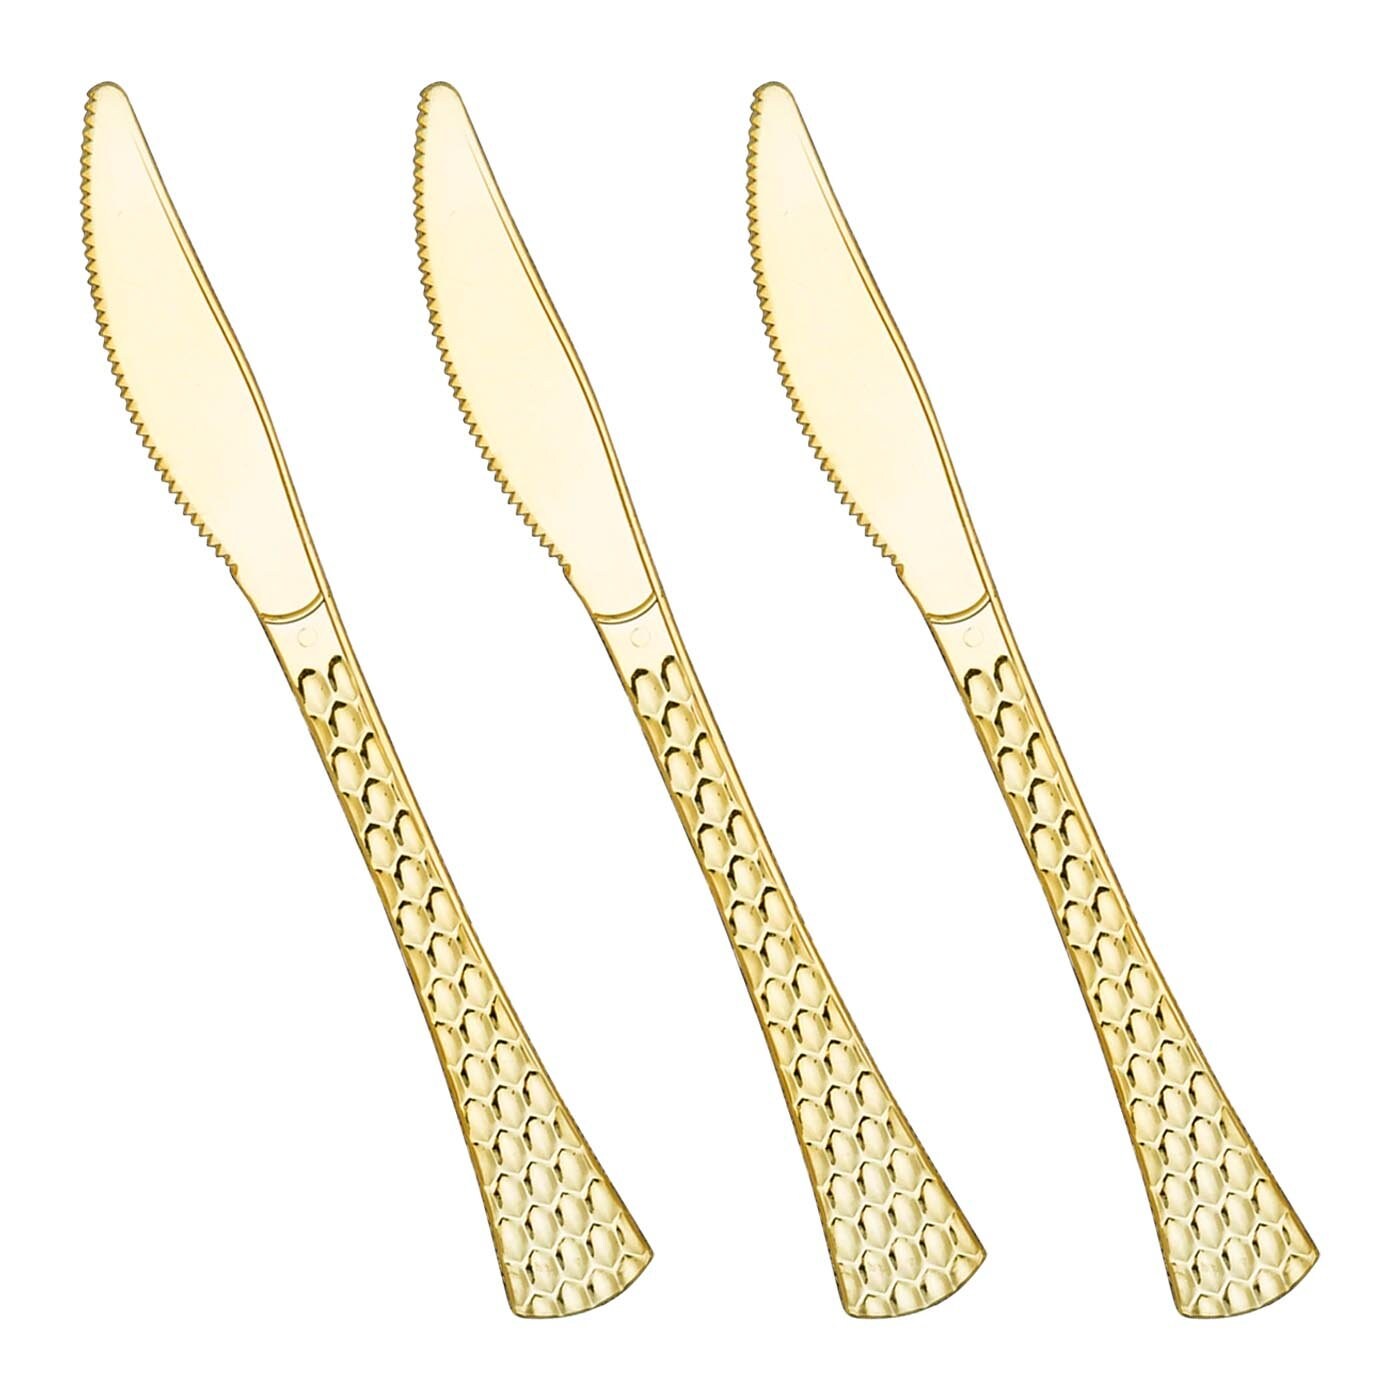 Shiny Gold Glamour Cutlery Disposable Plastic Knives (600 Knives)